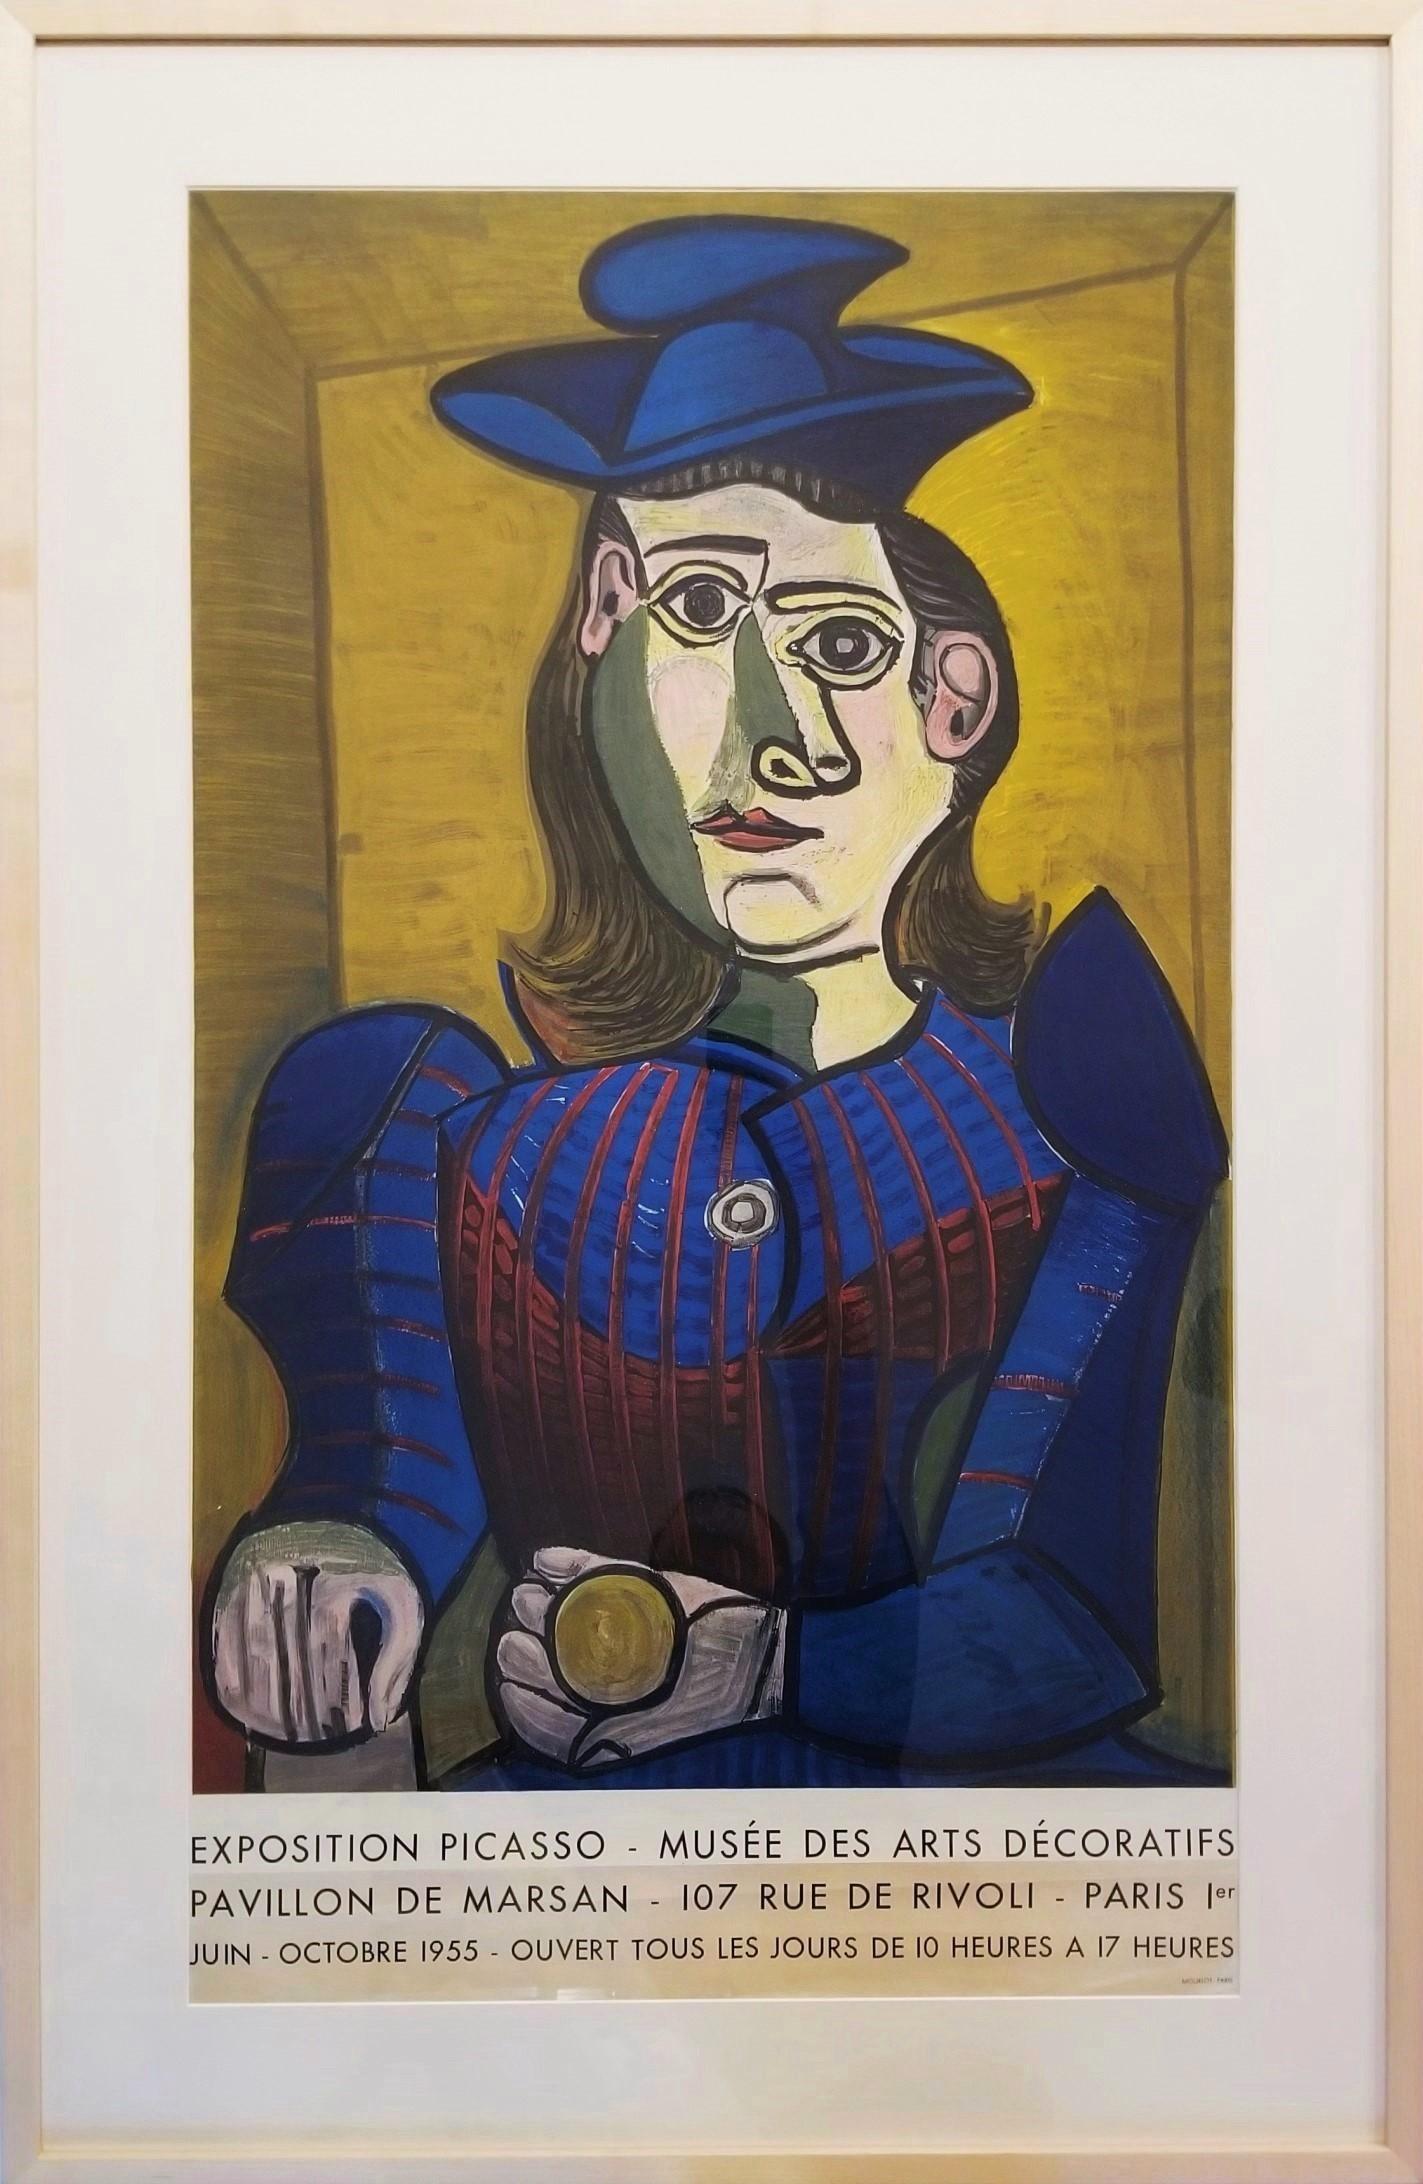 Dora Maar (Femme Assise) - Print by (after) Pablo Picasso